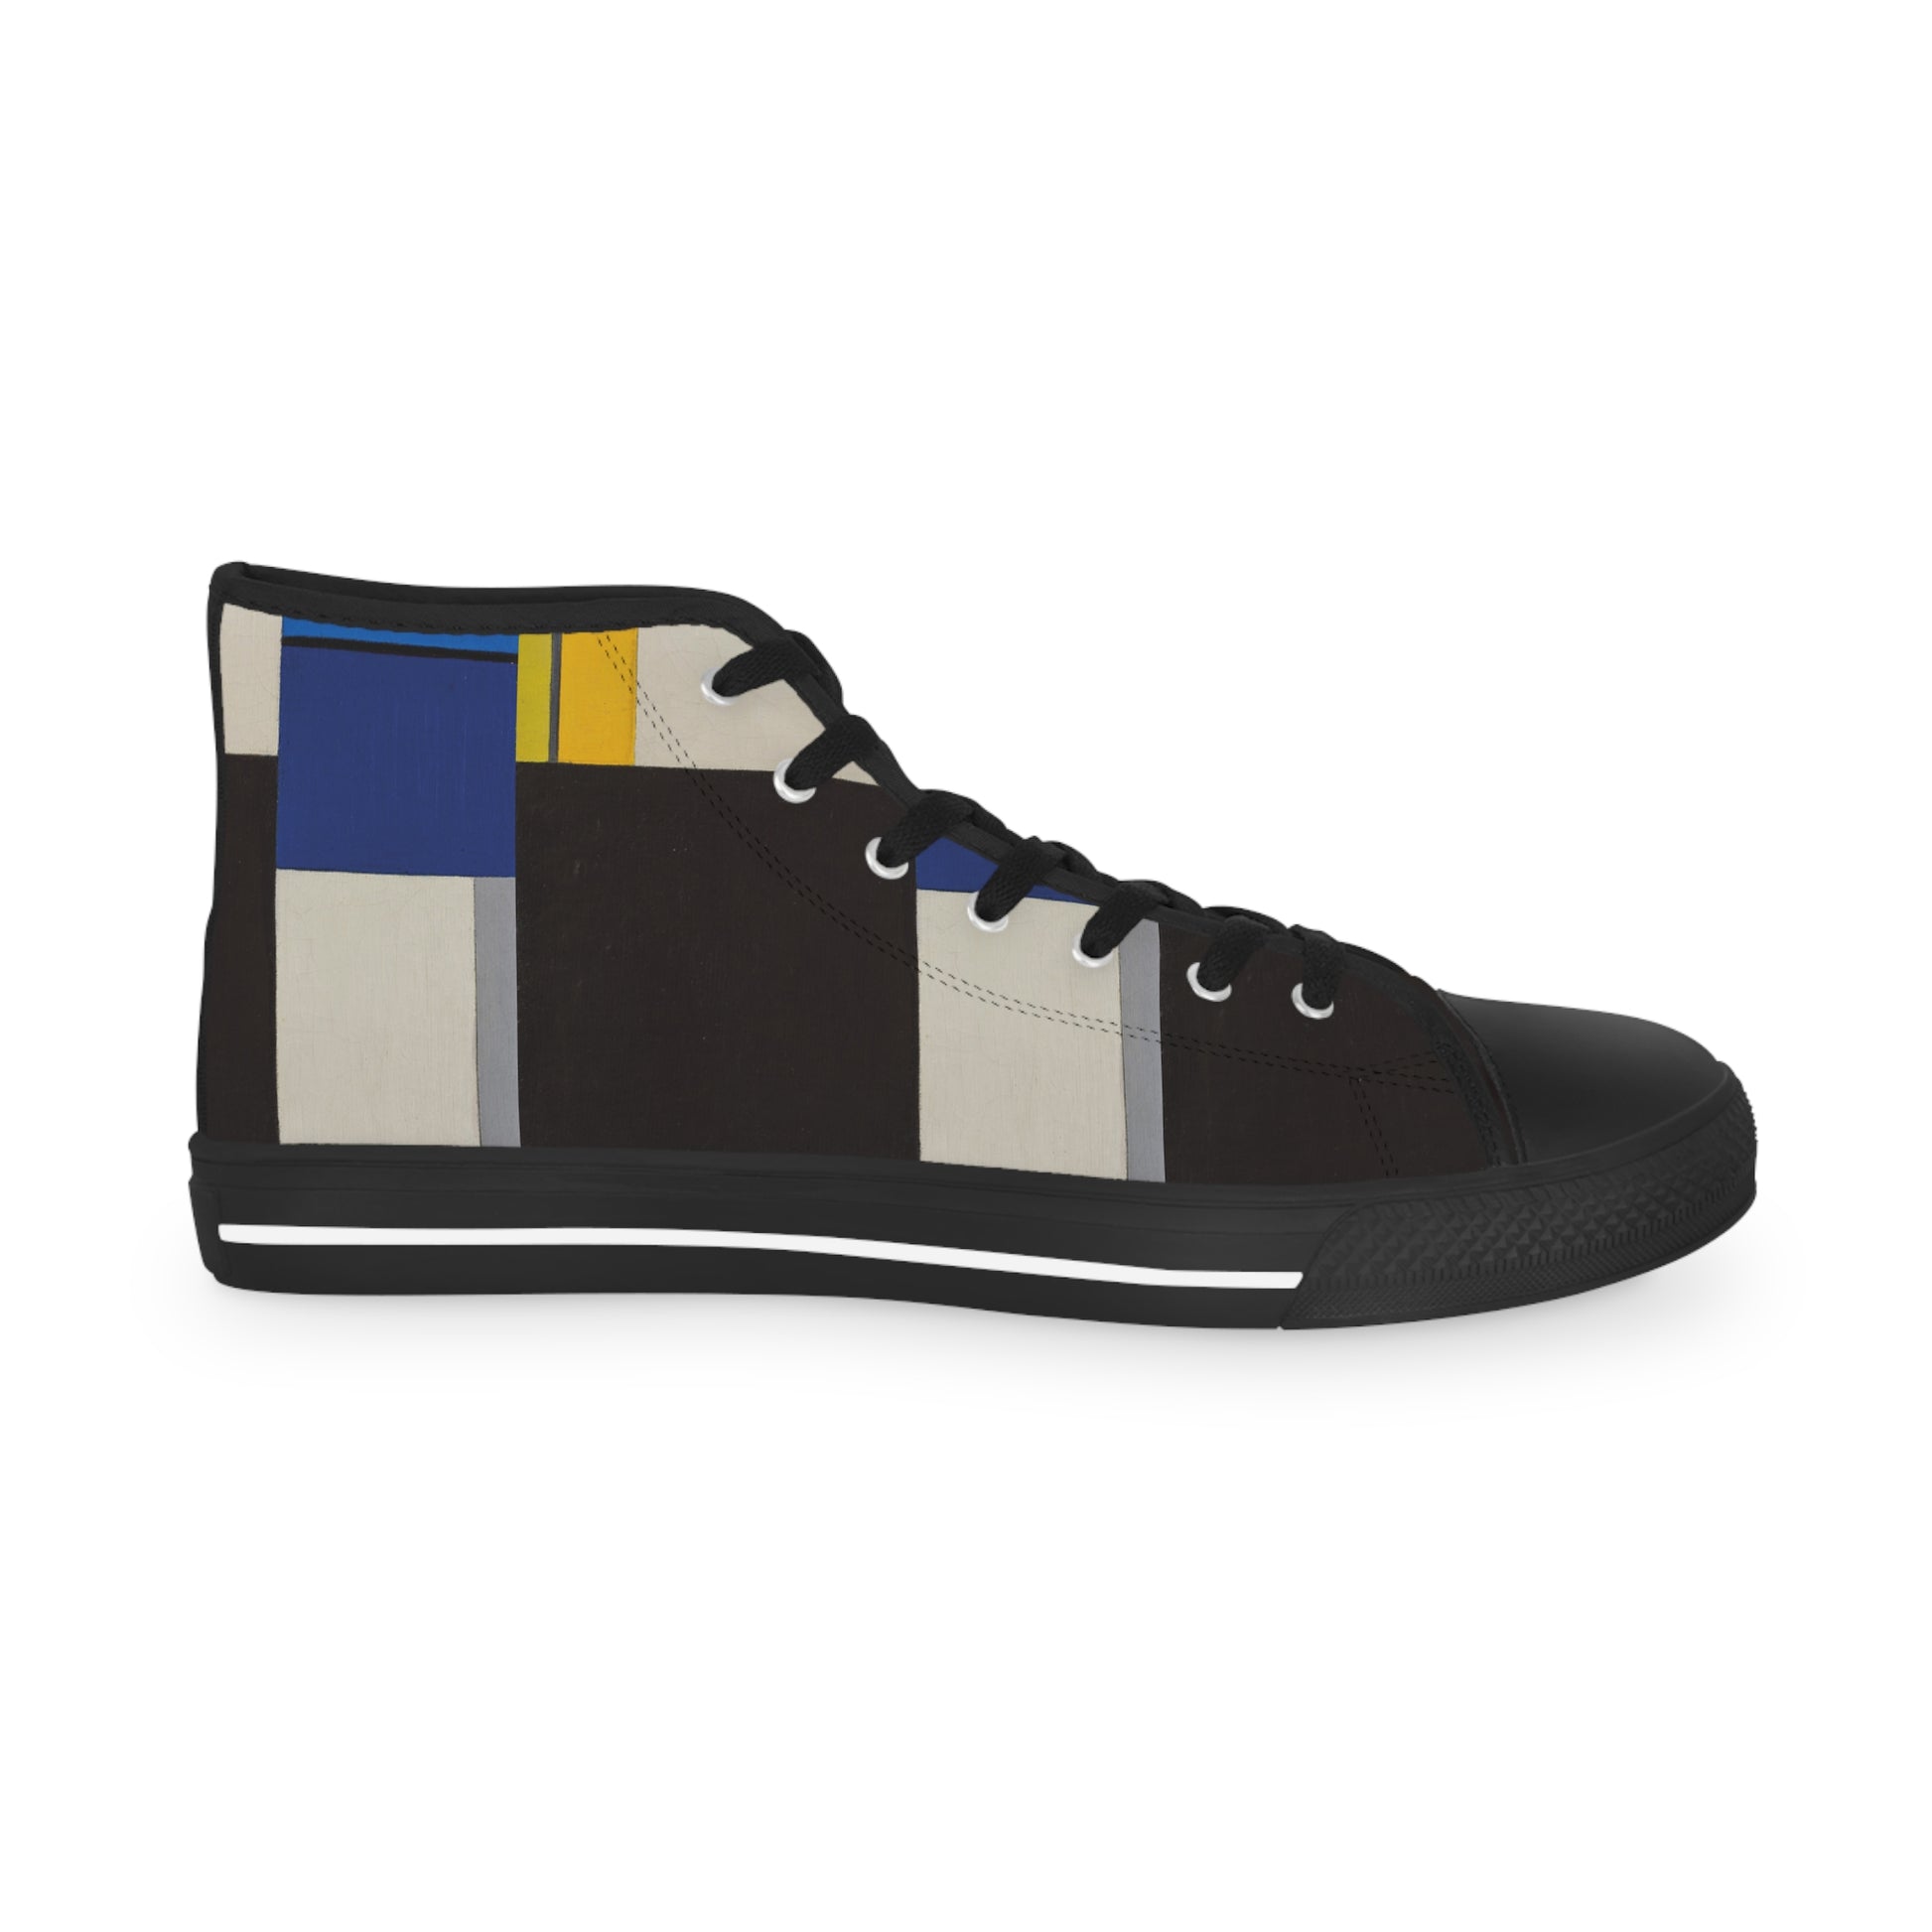 THEO VAN DOESBURG - COMPOSITION XXI - HIGH TOP SNEAKERS FOR HIM 